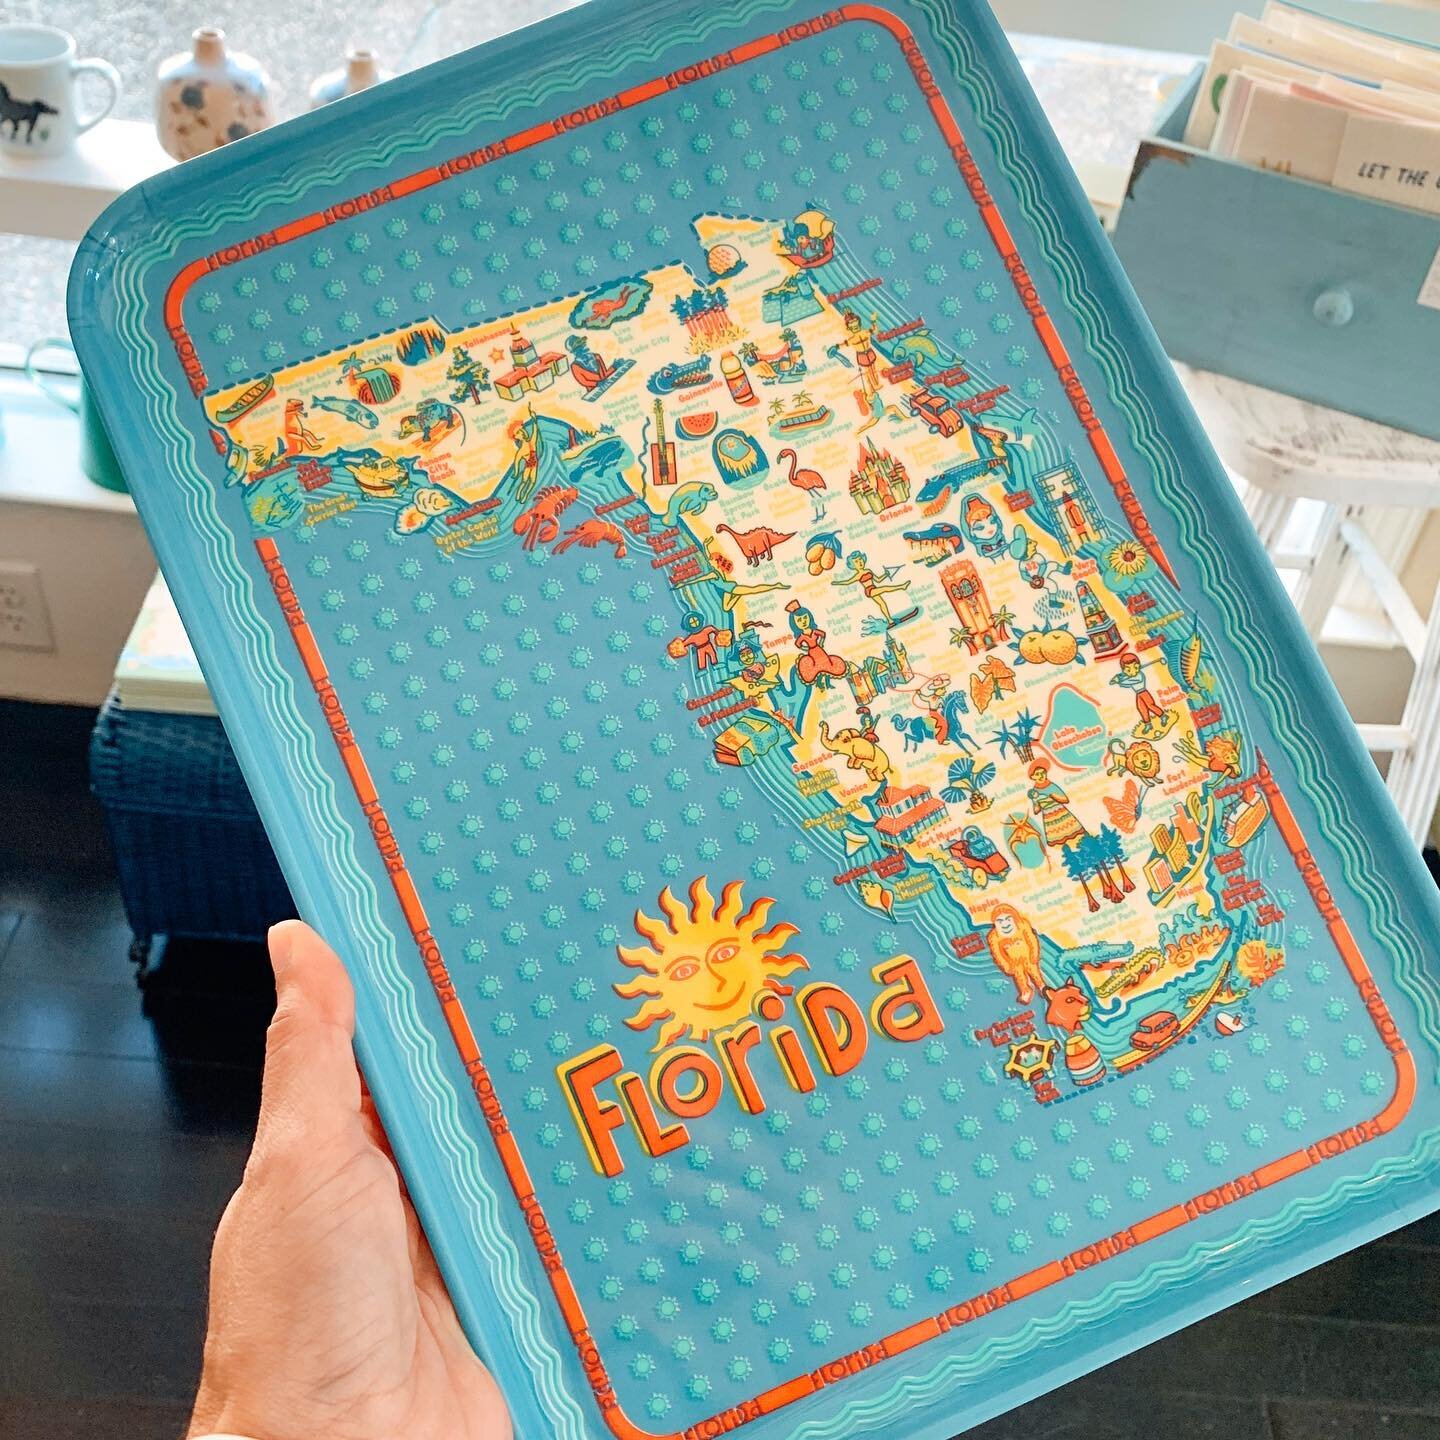 We&rsquo;re on the map! And Callahan too! ✨ Fun Florida melamine tray that includes 2 Nassau County towns!🌞🌴
.
.
.
#hudsonandperry #ameliaisland #fernandinabeach #shoplocal #loveamelia  #fernandinabeachmainstreet